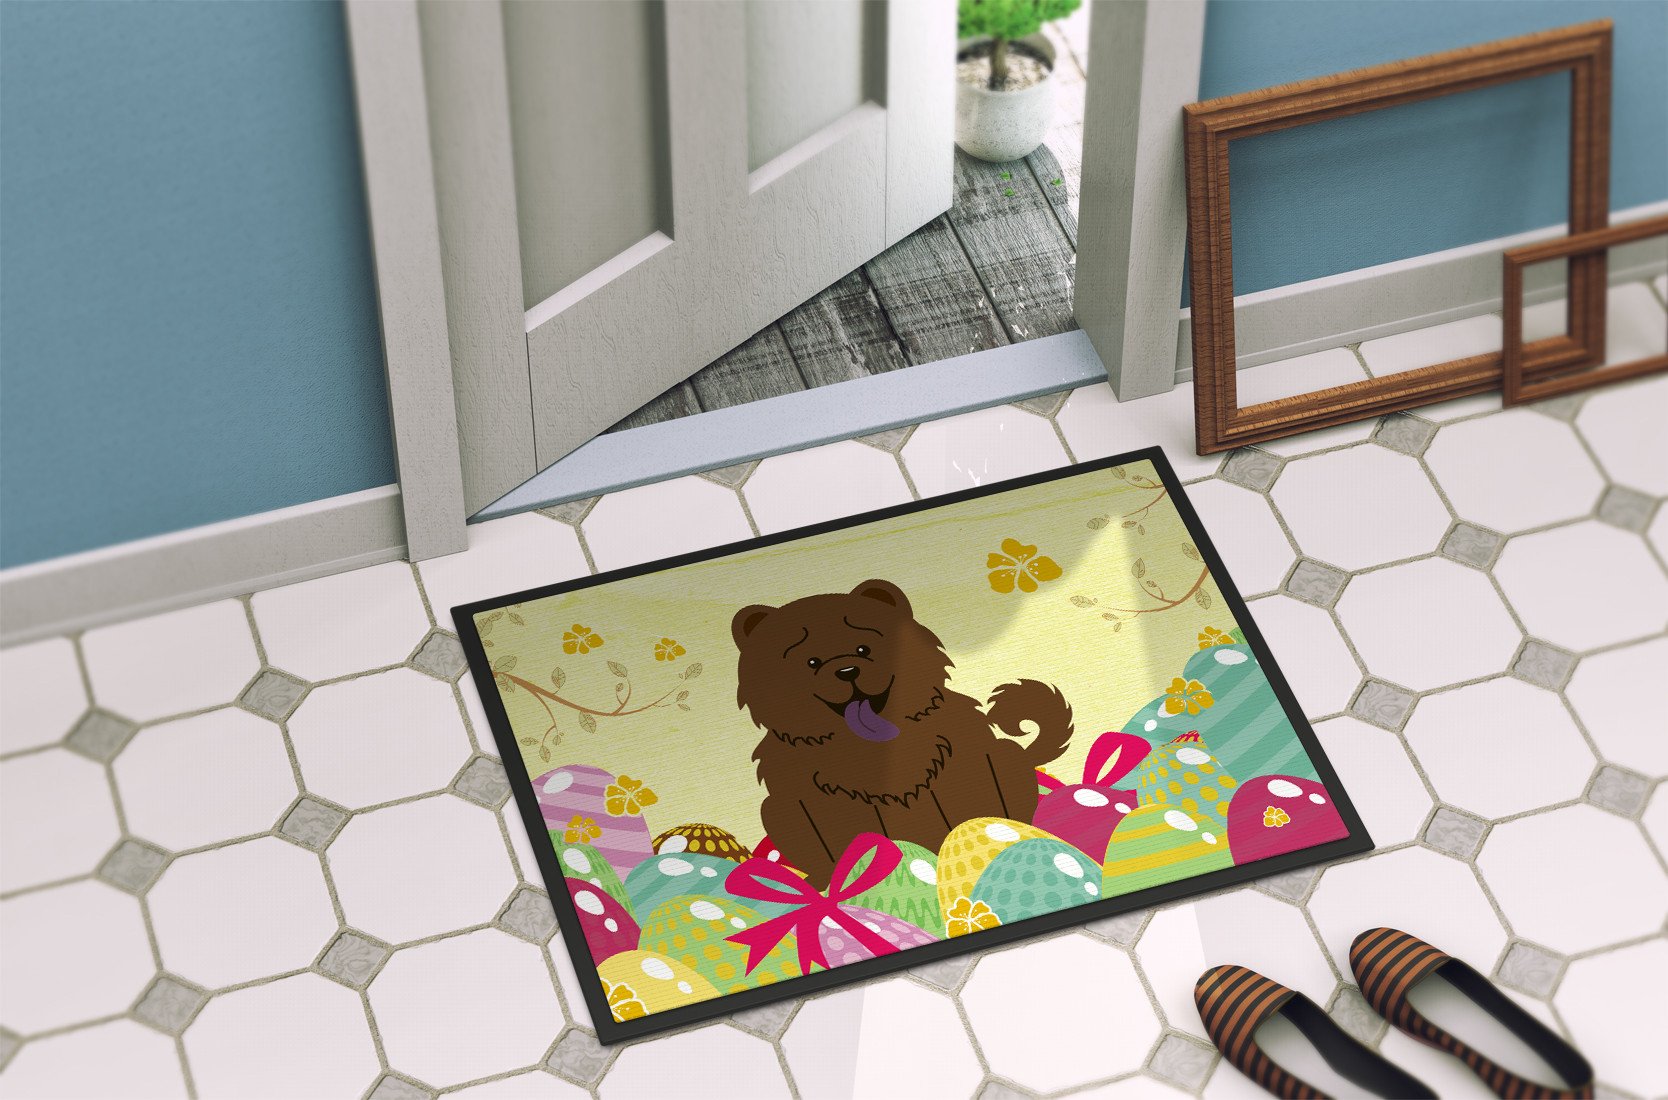 Easter Eggs Chow Chow Chocolate Indoor or Outdoor Mat 24x36 BB6141JMAT by Caroline's Treasures